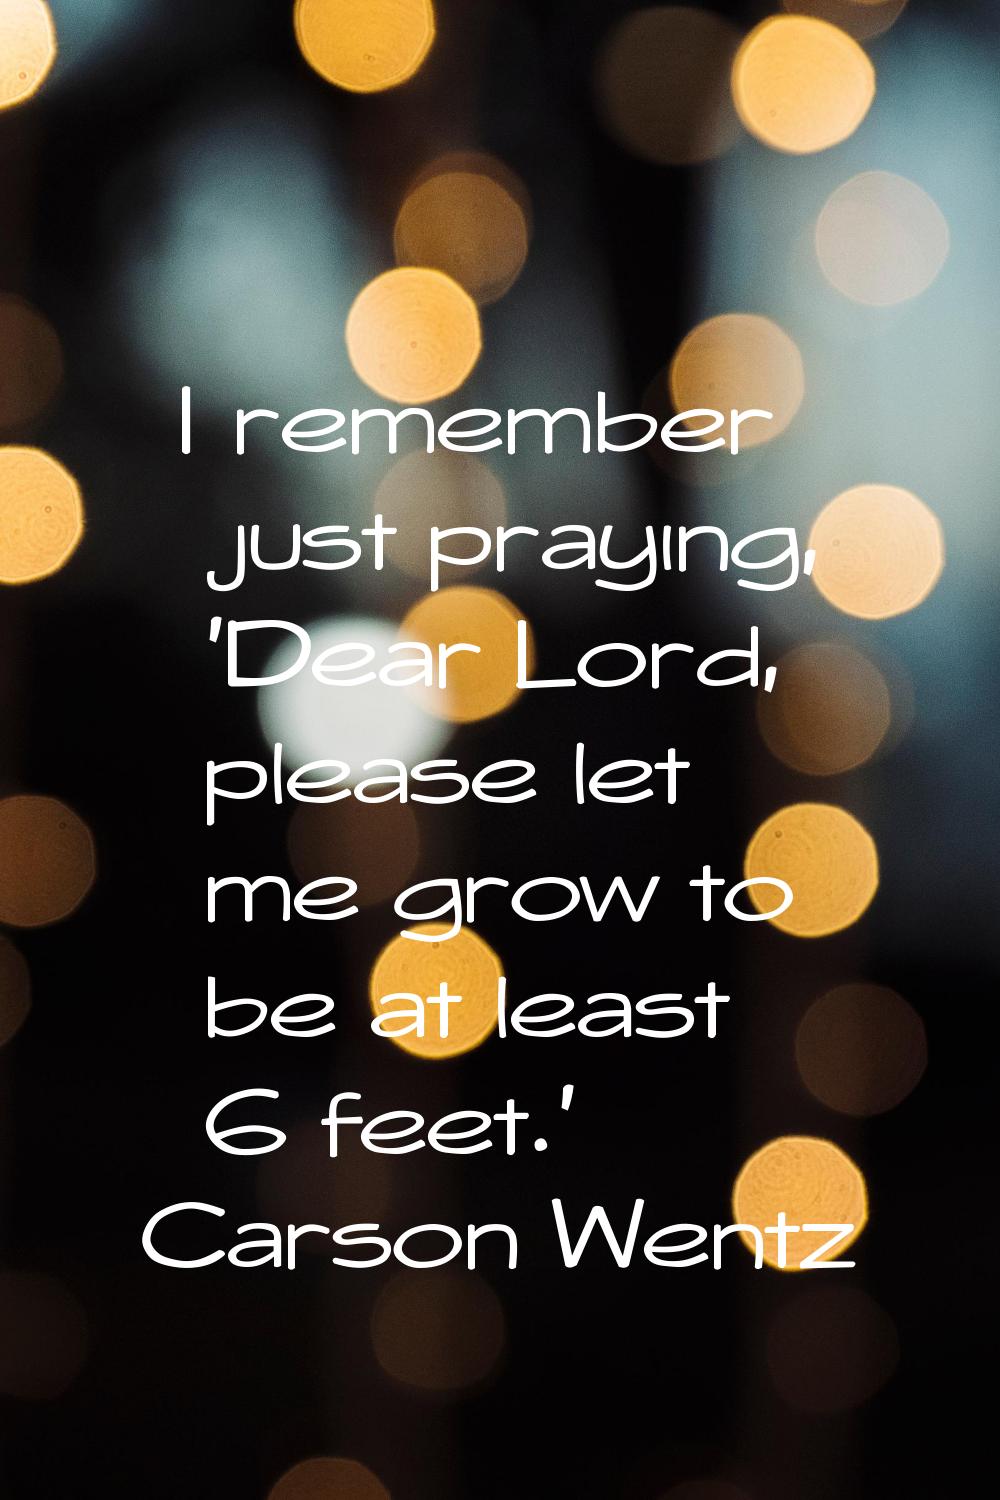 I remember just praying, 'Dear Lord, please let me grow to be at least 6 feet.'